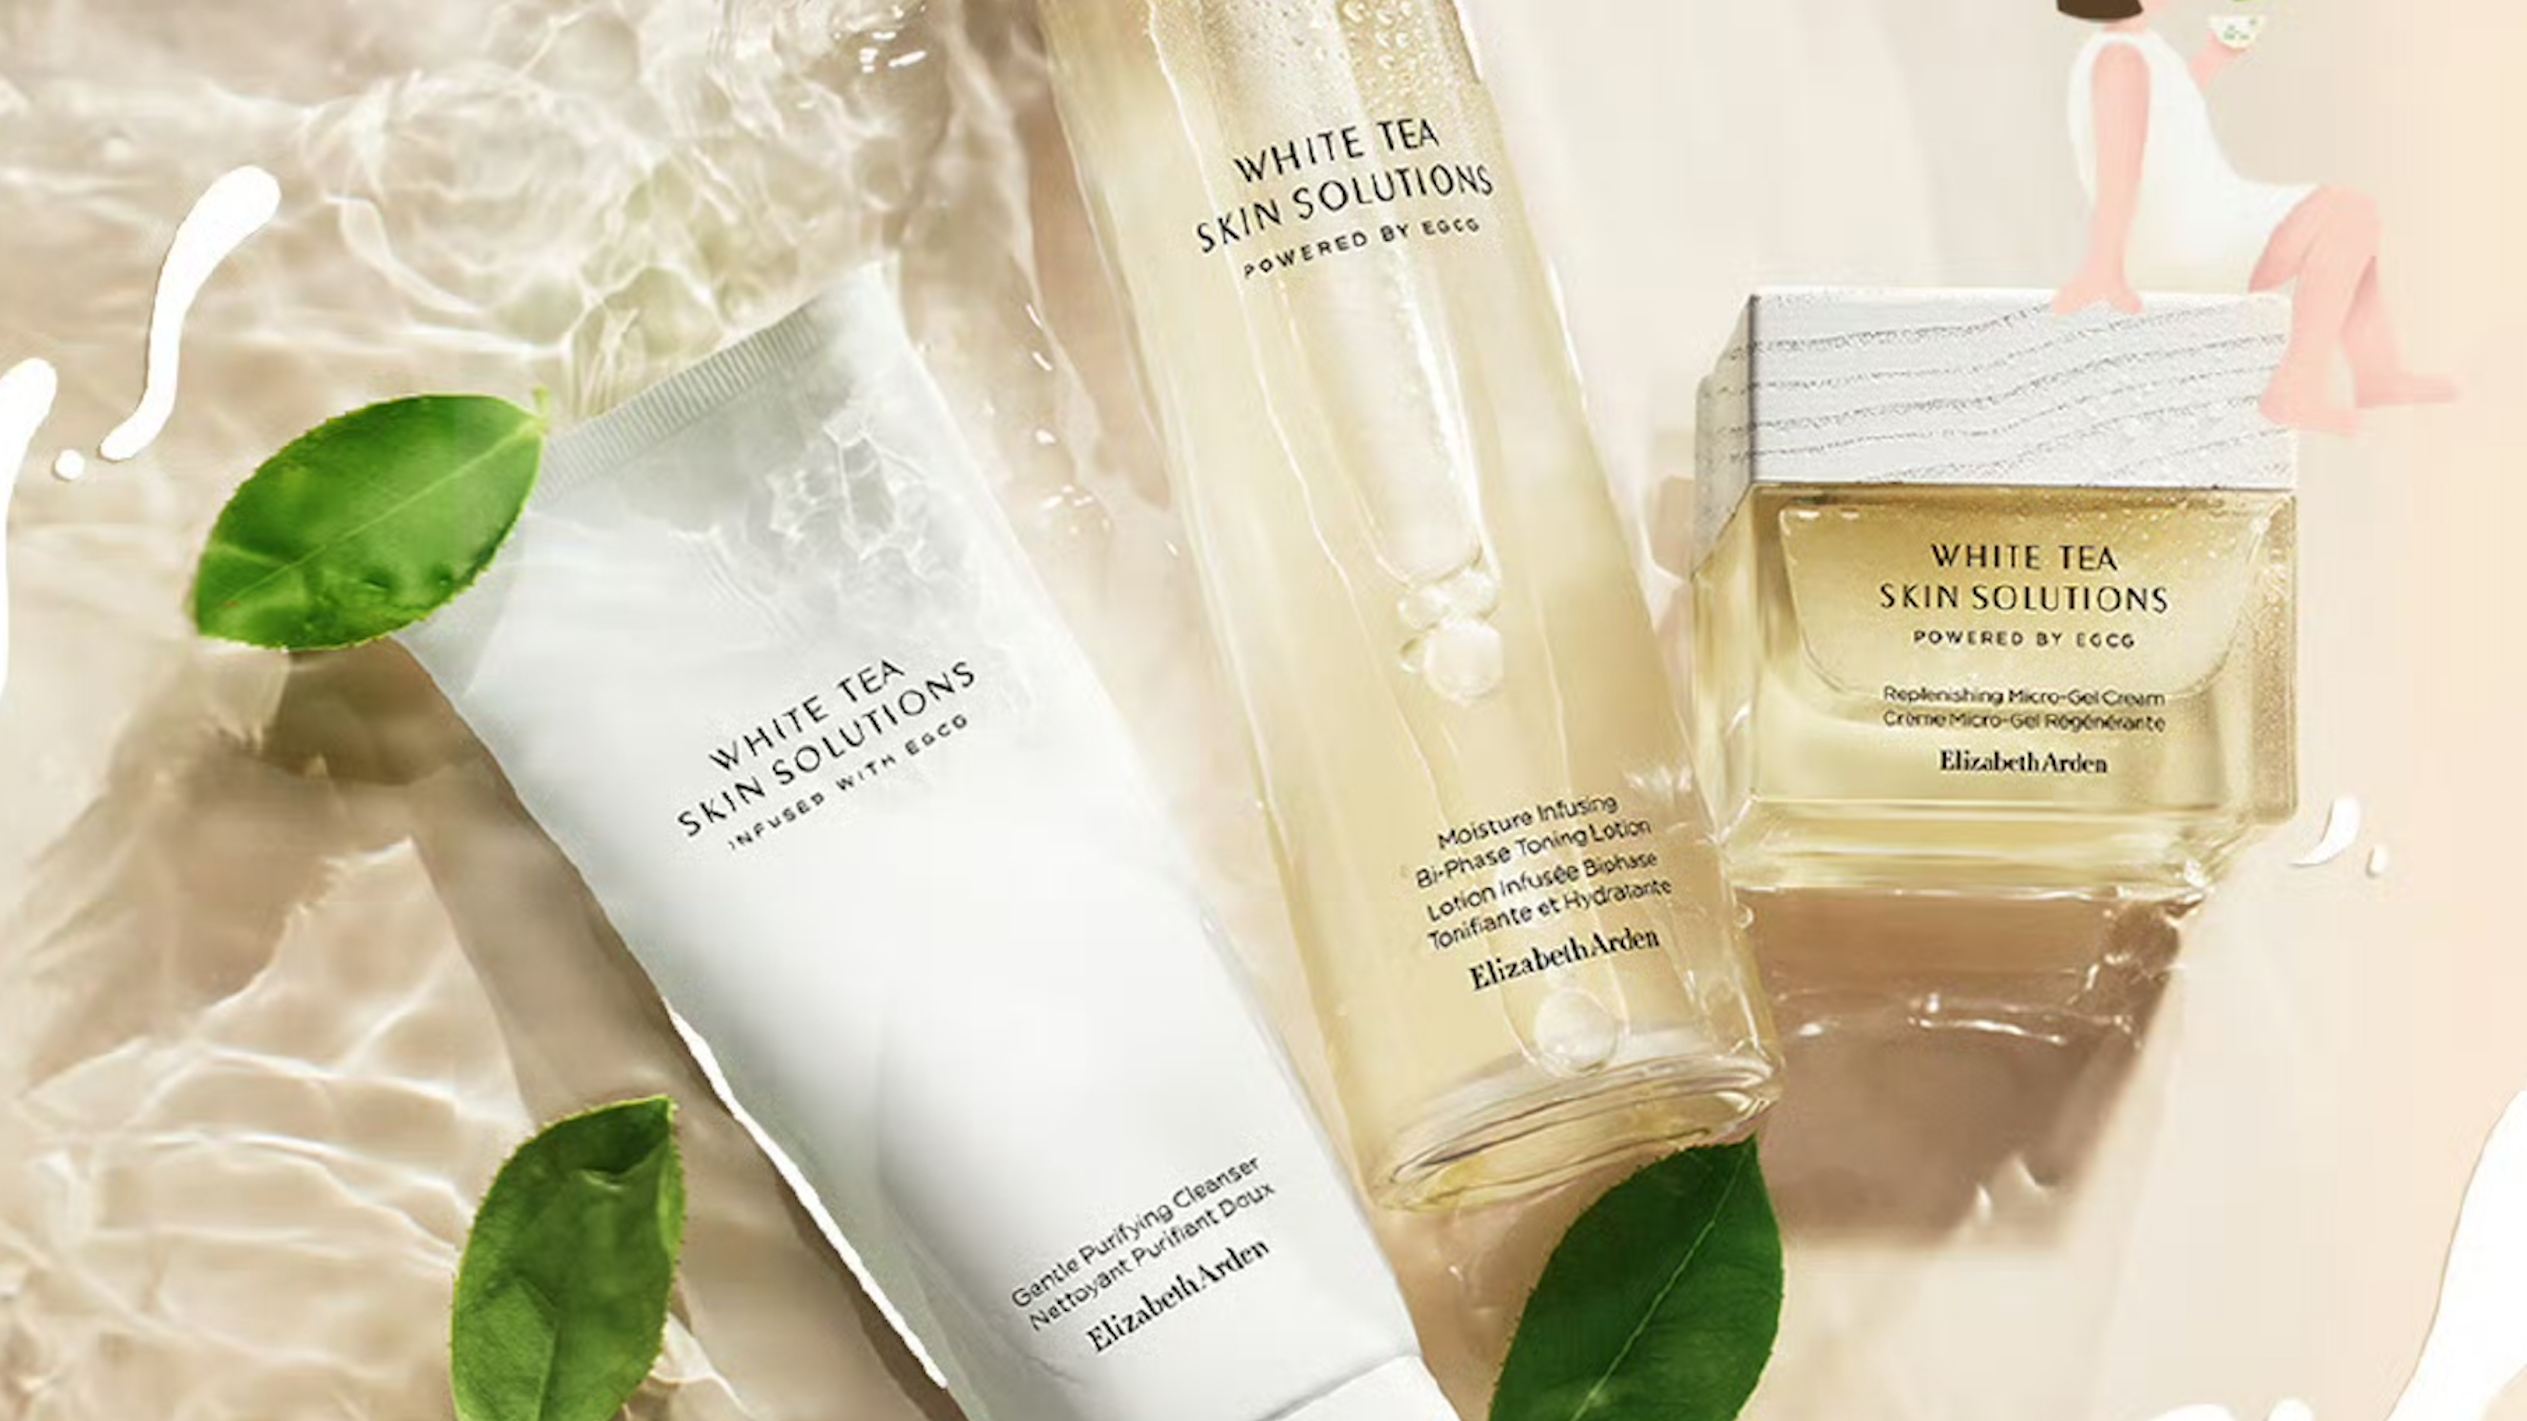 Elizabeth Arden’s new White Tea Skin Solutions series was fined $2750 (20,000 RMB) for allegedly misleading consumers. Image: Elizabeth Arden